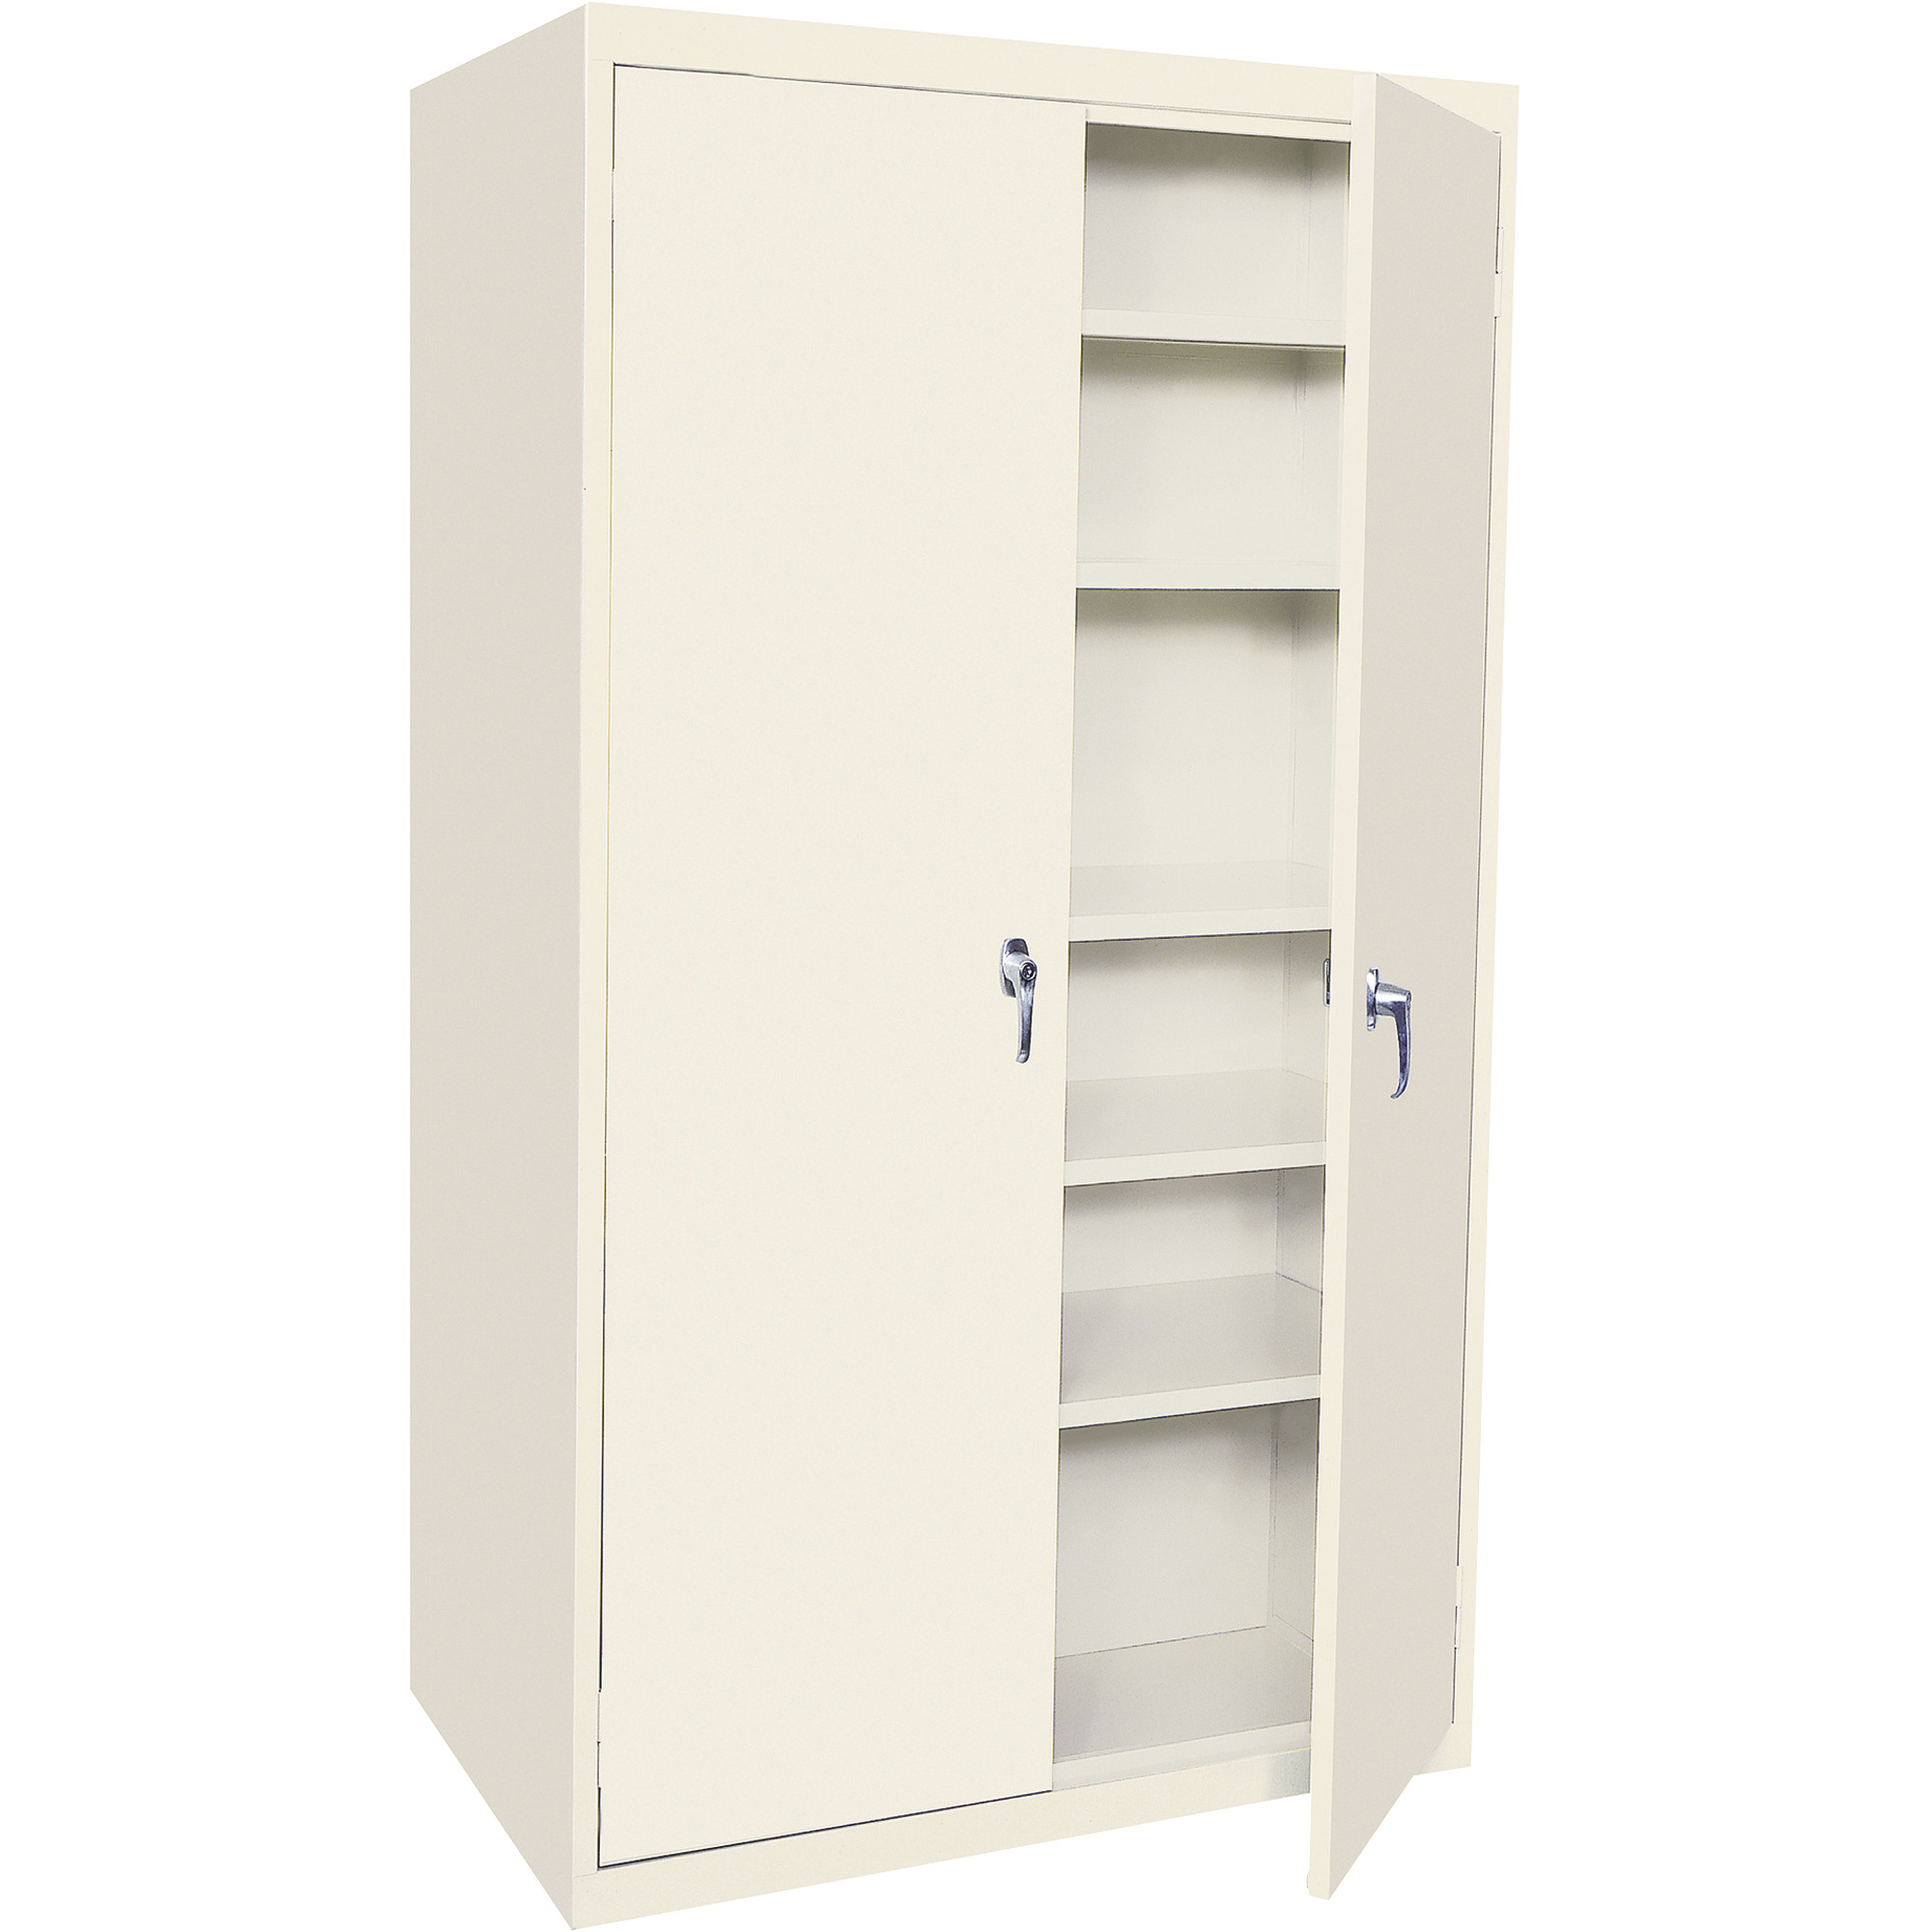 Storage Cabinet — Putty, 3 Adjustable Shelves/2 Fixed Shelves, 36Inch W x 18Inch D x 78Inch H, Model - Steel Cabinets USA 5-7818-AF-P